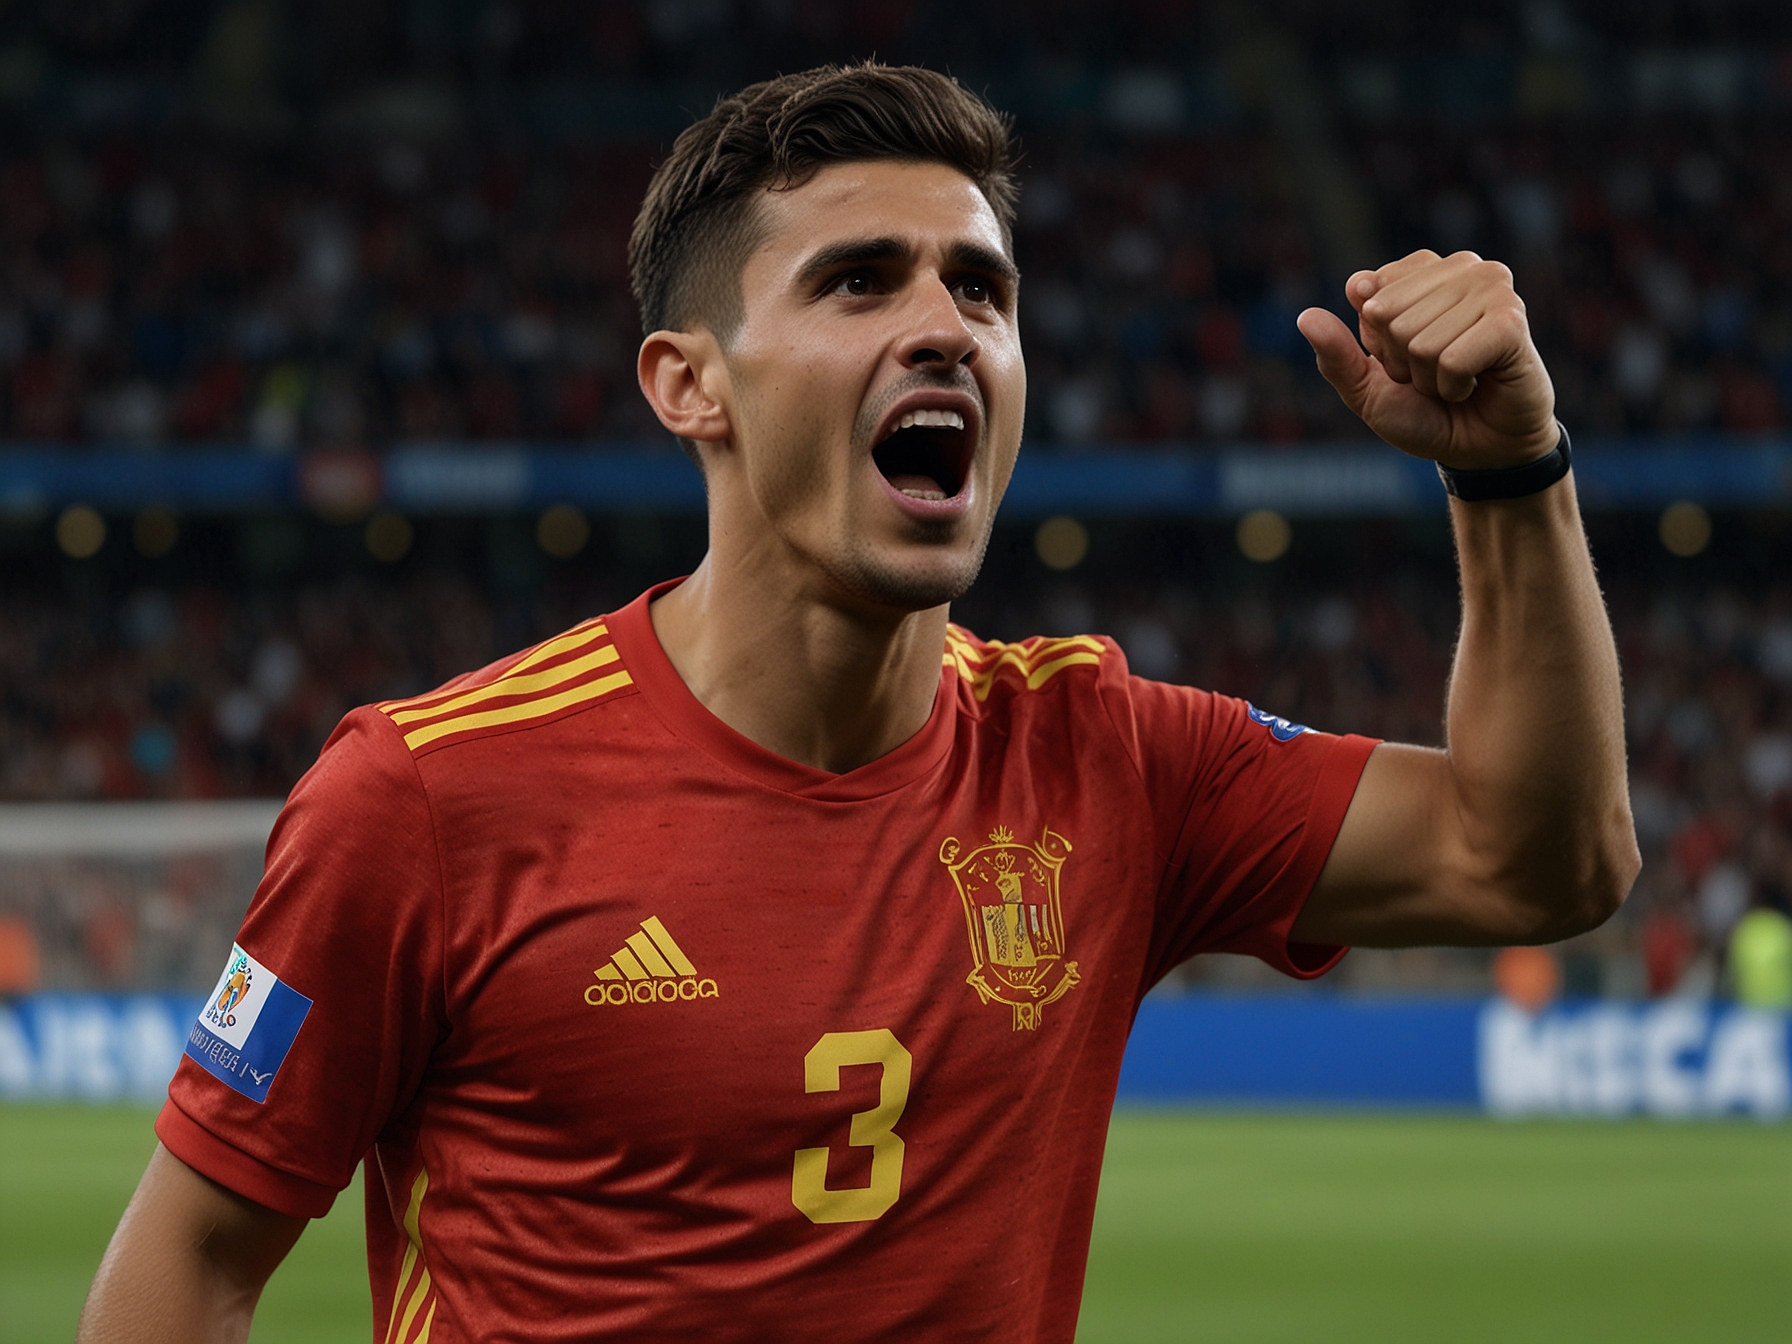 Spain's Rodri celebrates after scoring a crucial equaliser against Georgia in the Euro 2024 qualifier, lifting his team's spirits and showcasing his skill and determination.